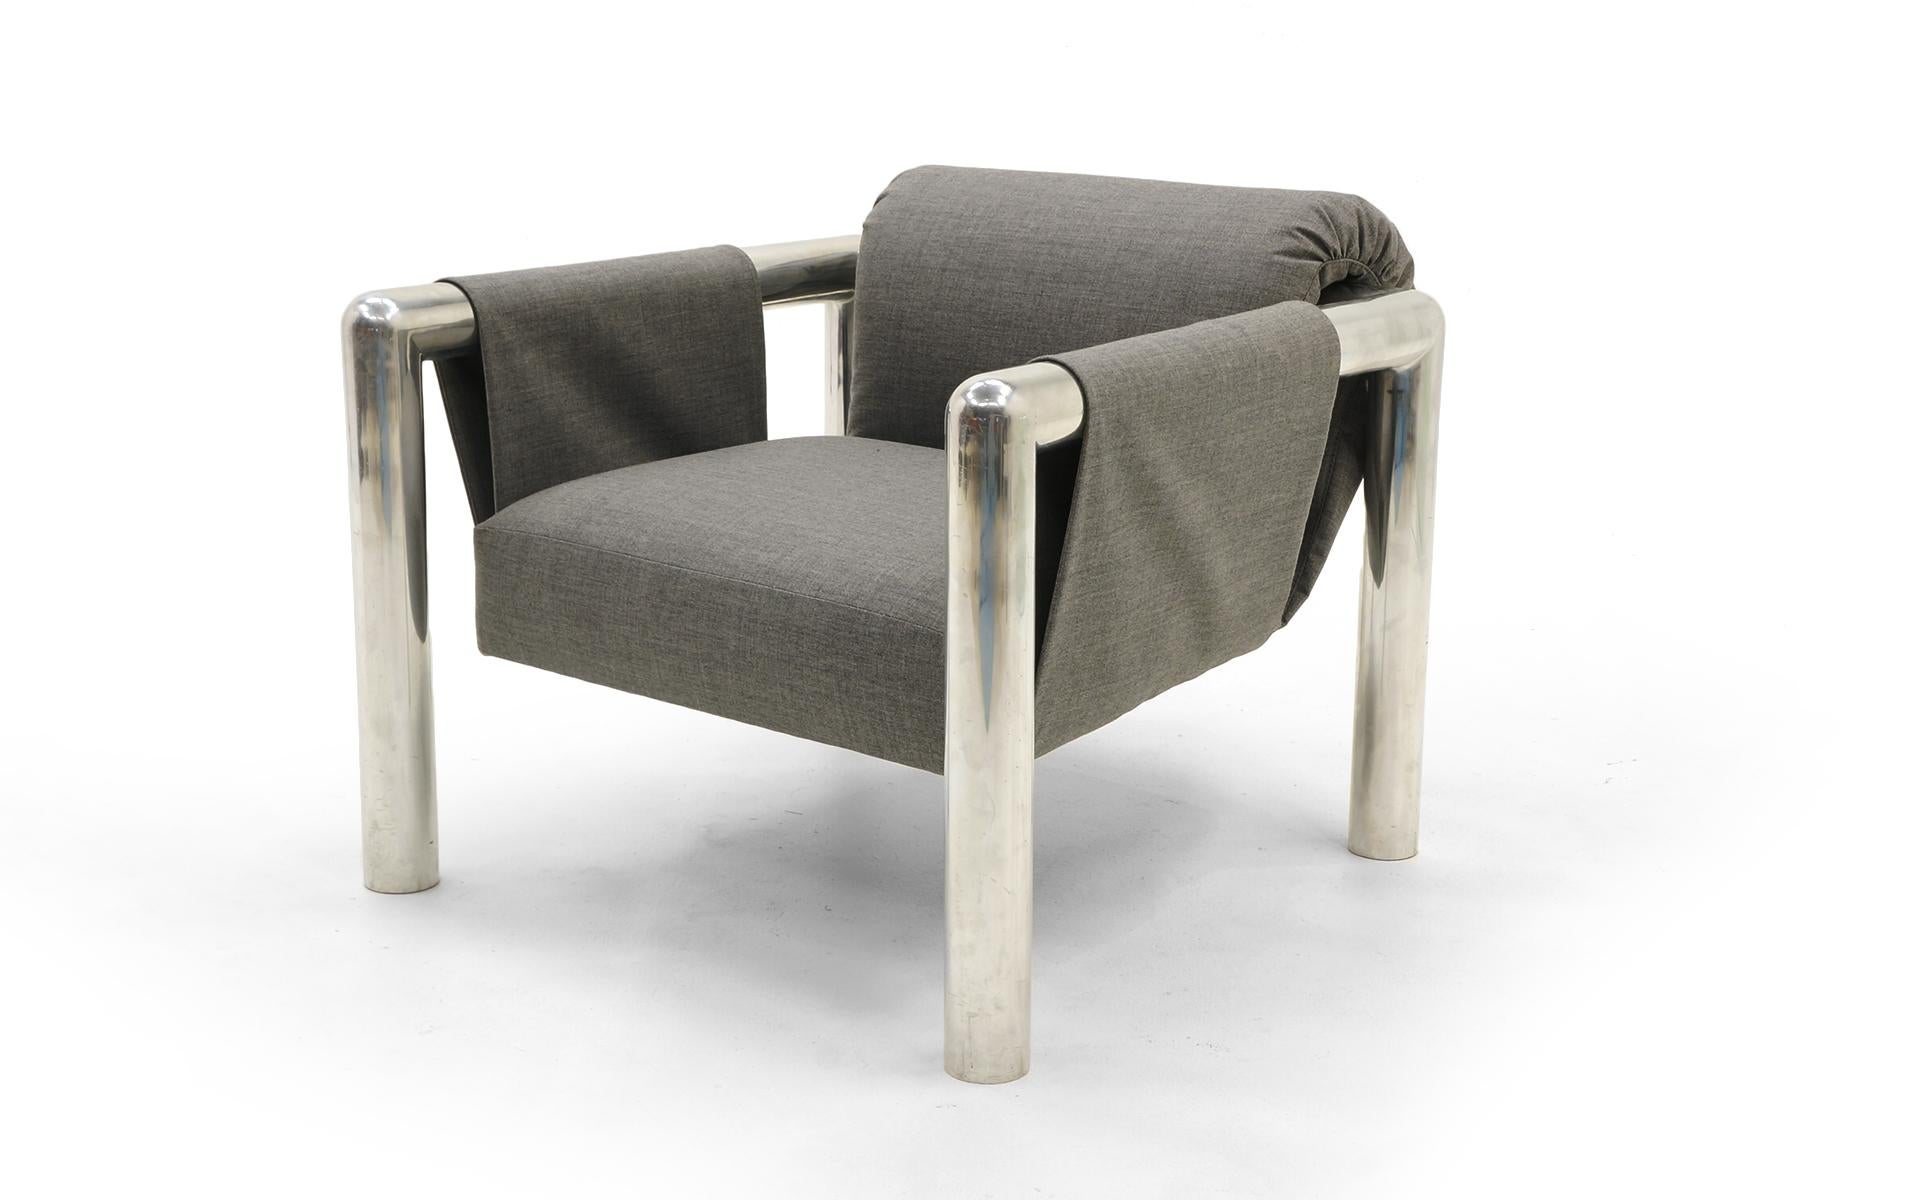 Late 20th Century Pair of Lounge Chairs with Arms by John Mascheroni, New Maharam Upholstery